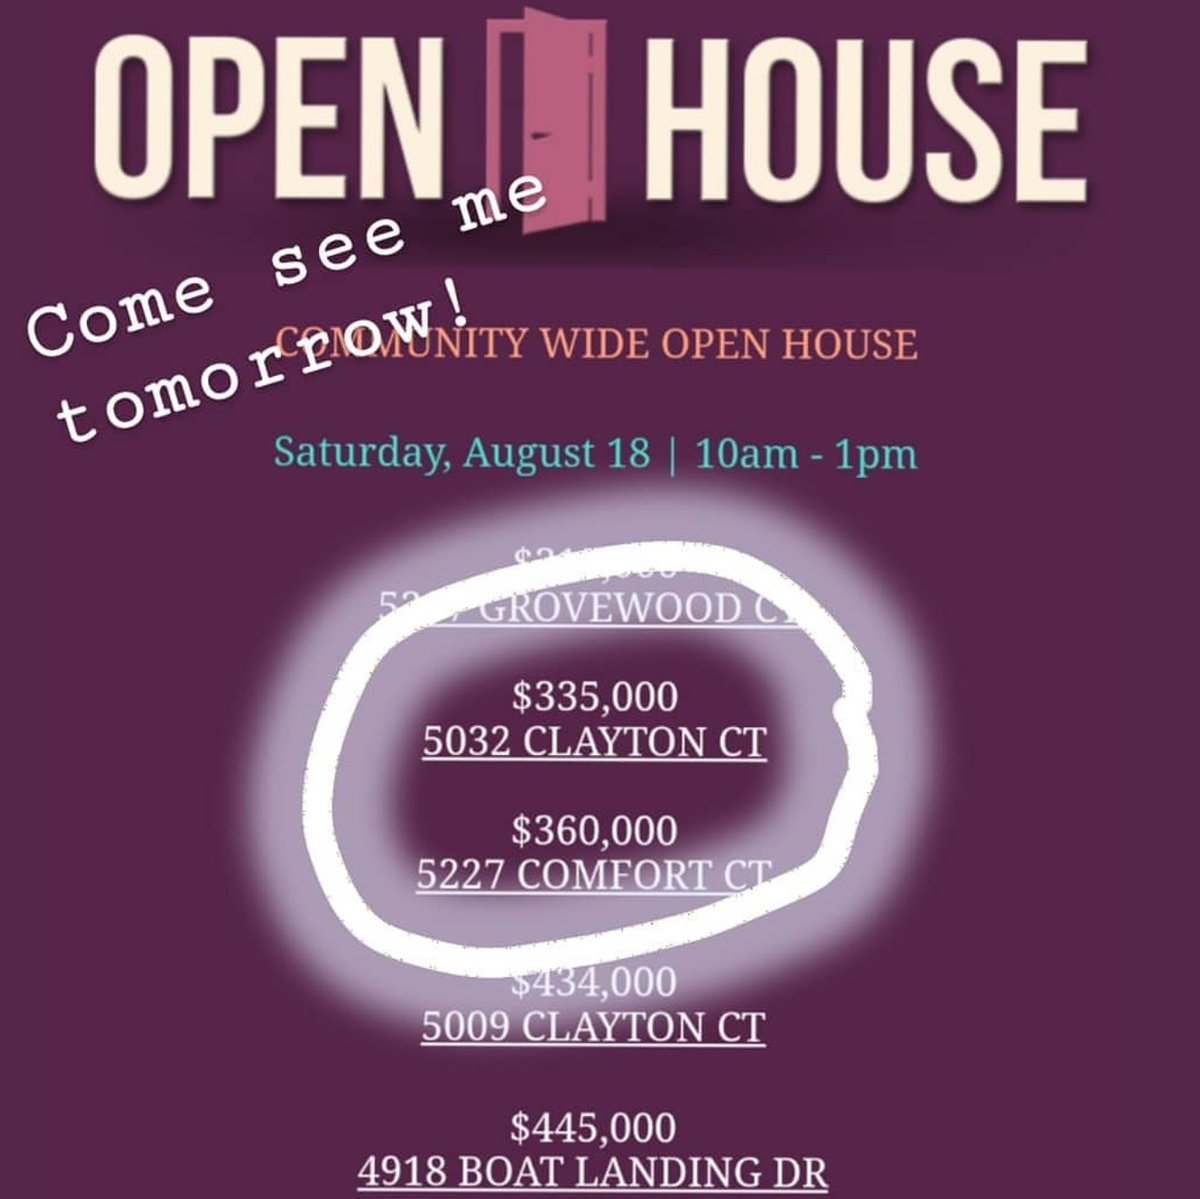 Come see me TOMORTOW at the MEGA Open House event at the King & Bear World Golf Village. #OpenHouse #WorldGolfVillage #StJohnsCounty #RealEstate #TrudatCanSellThat